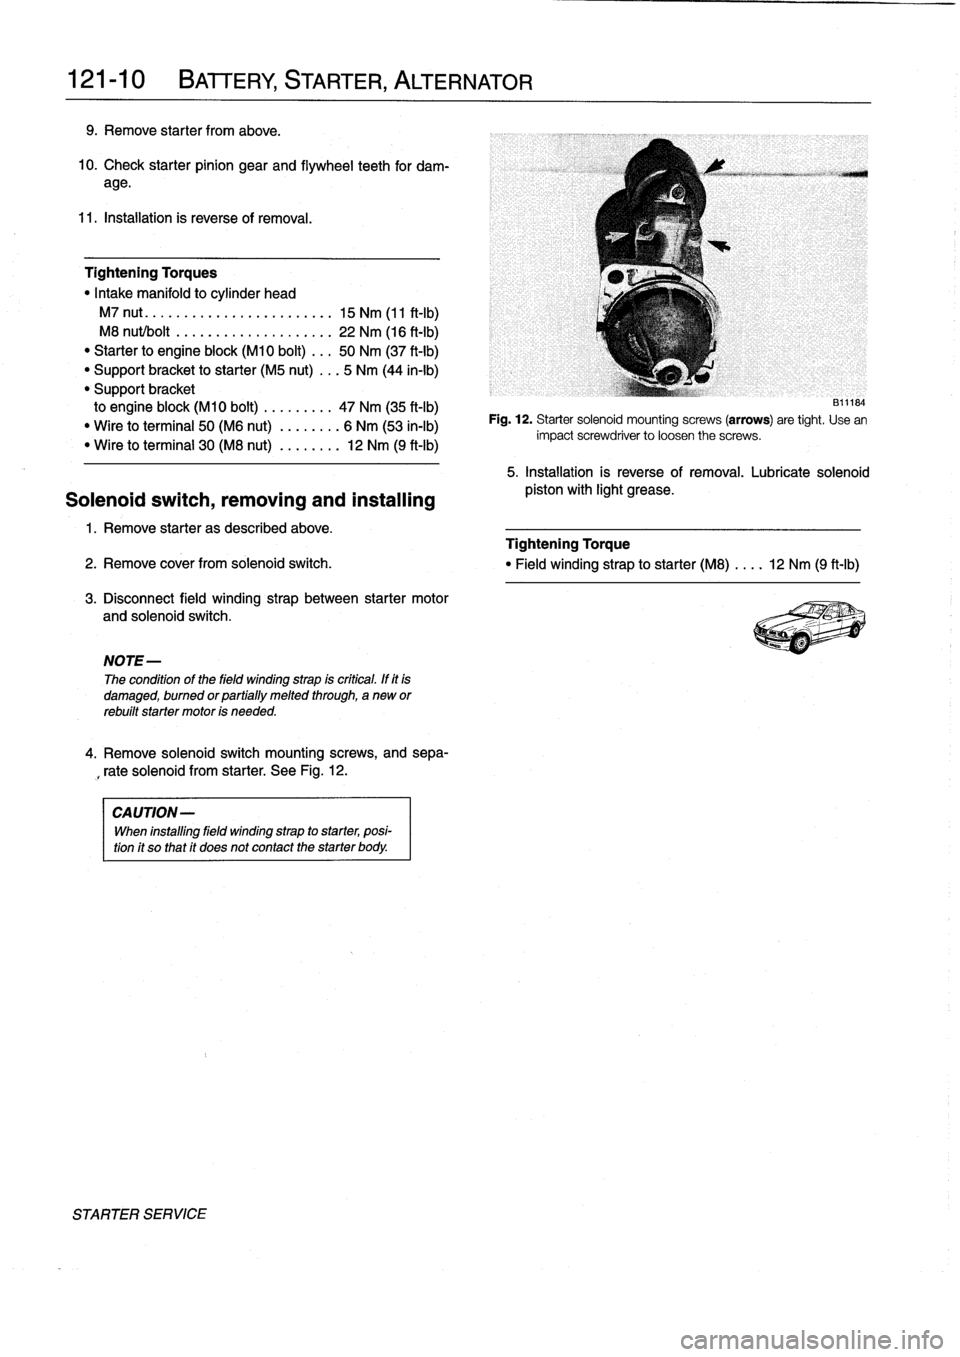 BMW 328i 1997 E36 Owners Manual 
121-1
O

	

BATTERY,
STARTER,
ALTERNATOR

9
.
Remove
starter
from
above
.

10
.
Check
starter
pinion
gear
and
flywheel
teeth
for
dam-
age
.

11
.
Installation
is
reverse
of
removal
.

Tightening
Torq